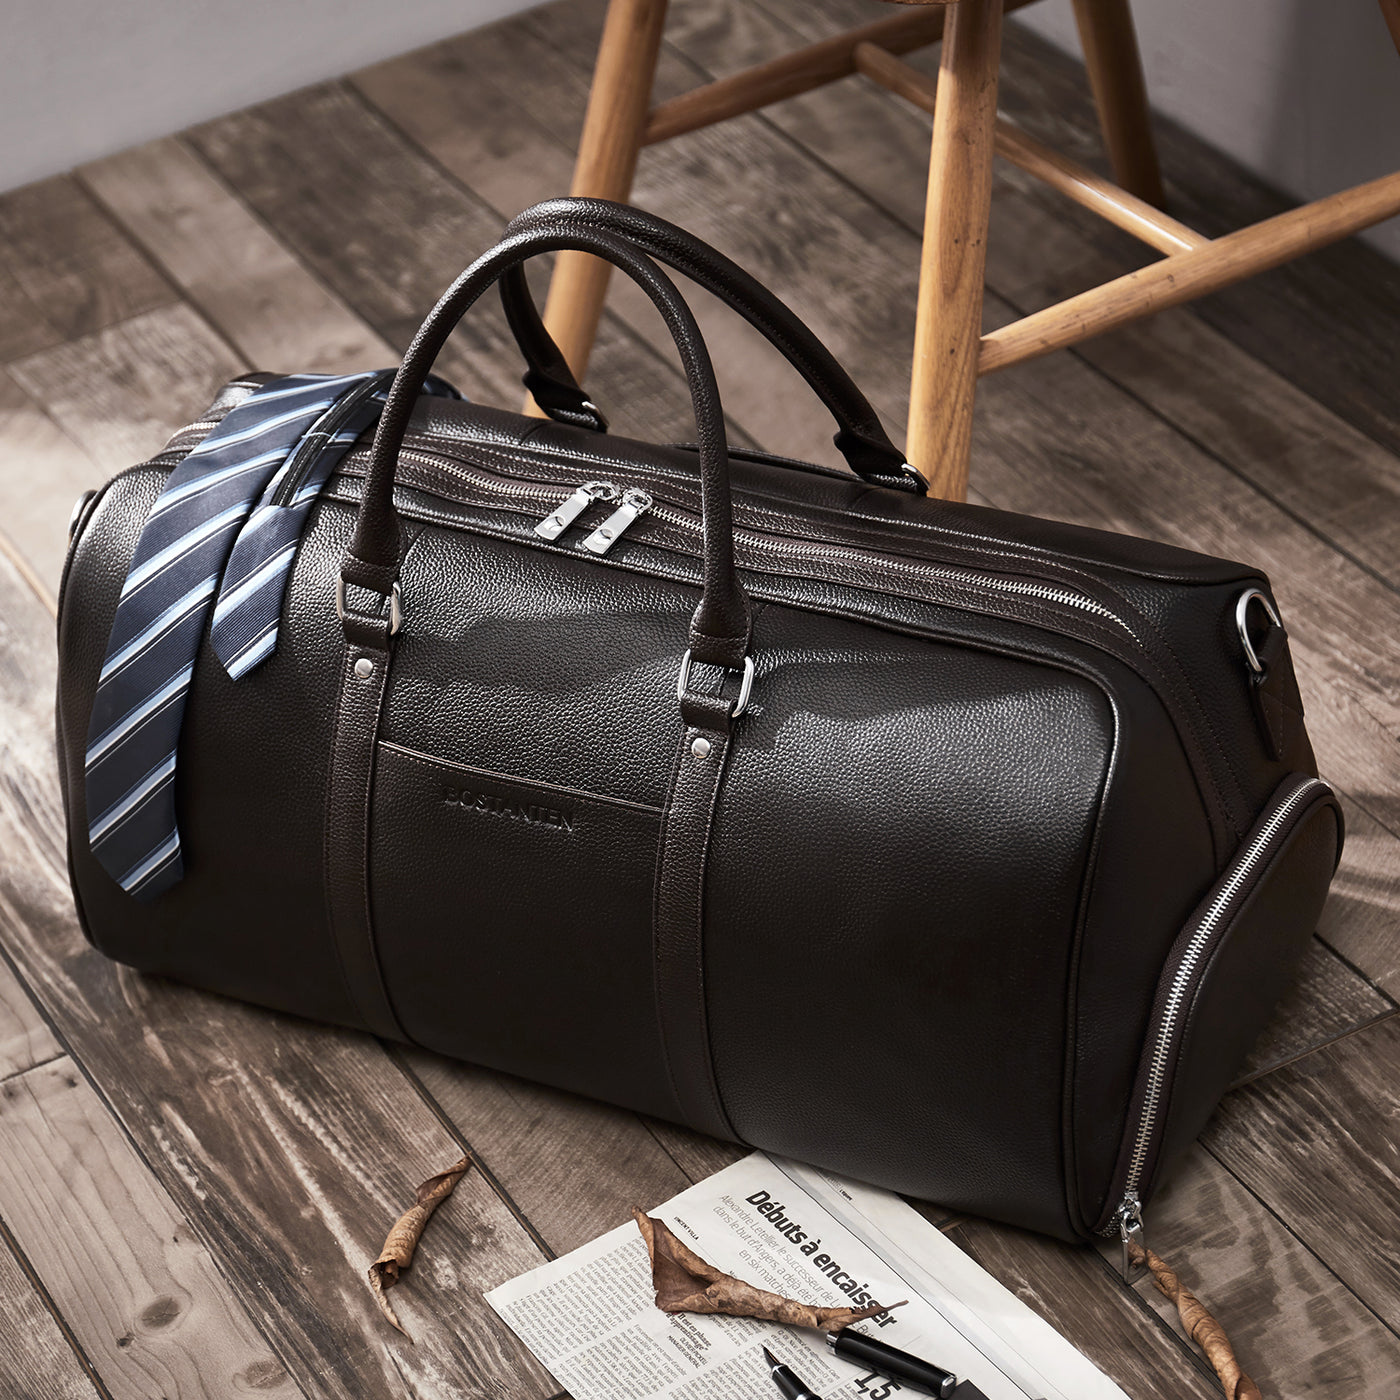 Men's Gym Sports Overnight Weekender Bag Leather Travel Bags for Men  Vintage Leather Duffle Bag Women Carry On Travel Holdall Bag 24 Inches